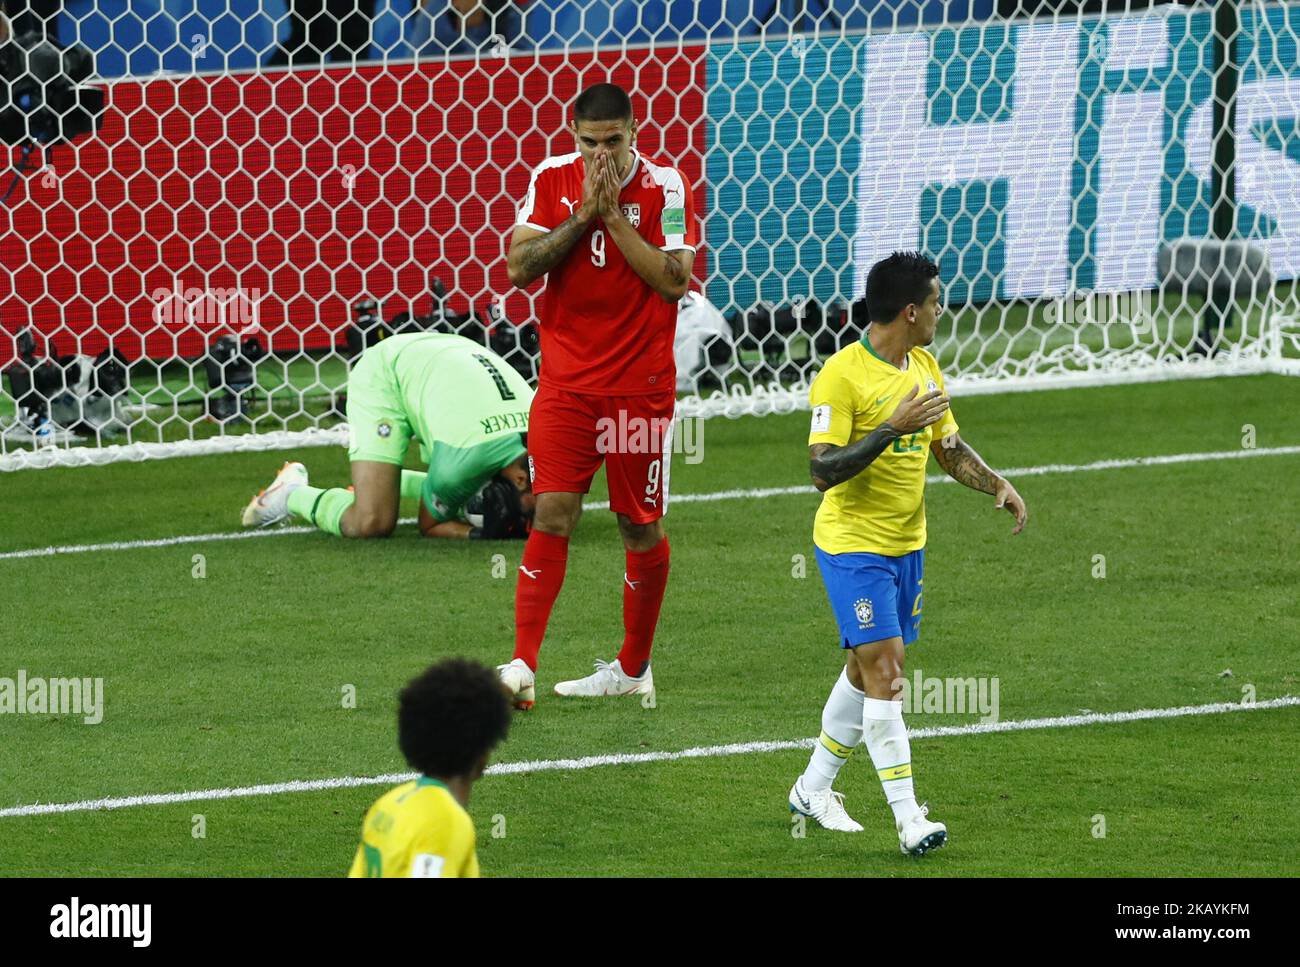 Group E Serbia v Brazil - FIFA World Cup Russia 2018 Aleksandar Mitrovic (Serbia)after a missed goal at Spartak Stadium in Moscow, Russia on June 27, 2018. (Photo by Matteo Ciambelli/NurPhoto)  Stock Photo